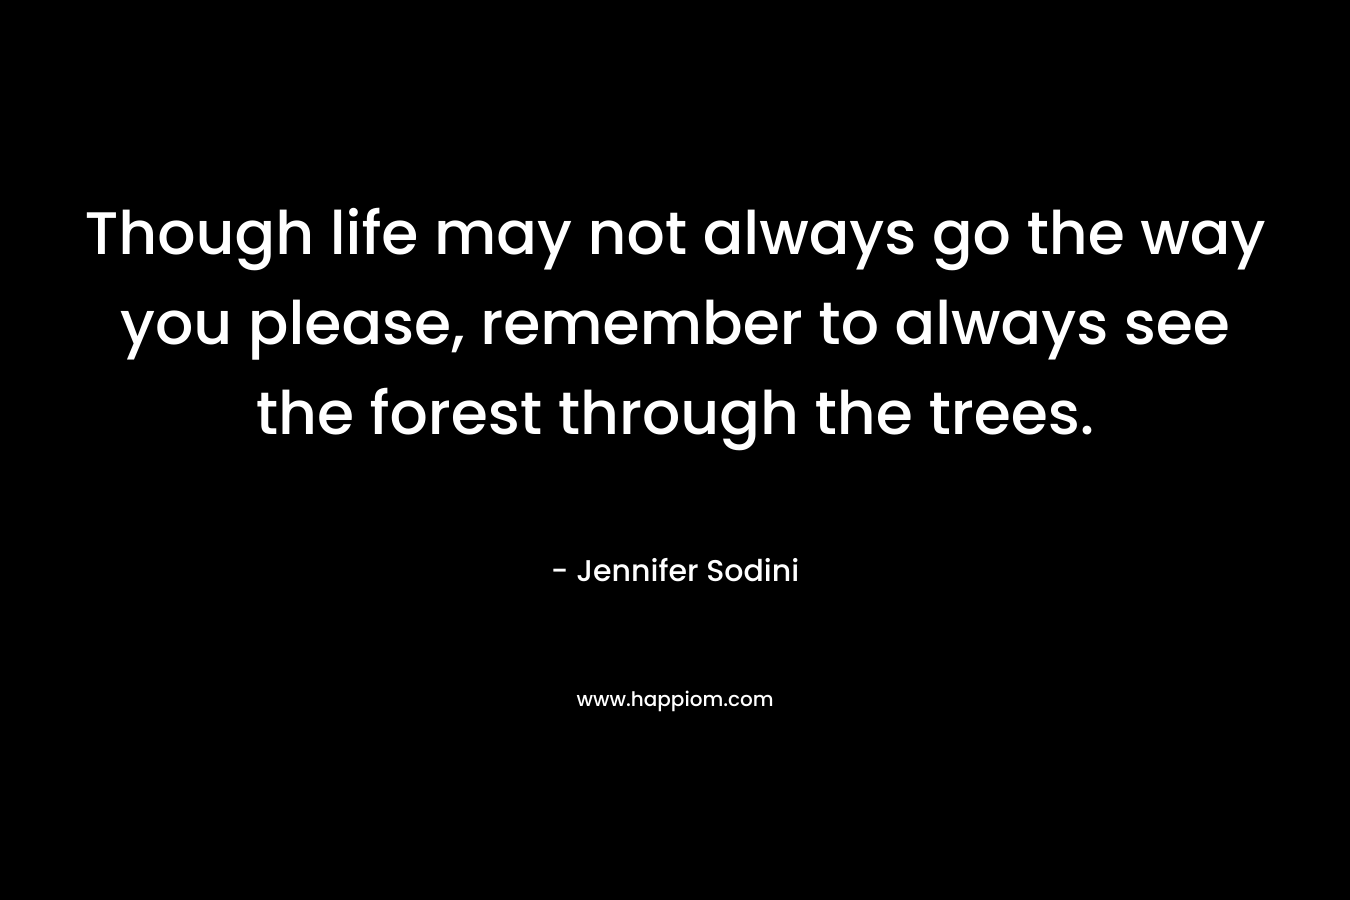 Though life may not always go the way you please, remember to always see the forest through the trees.